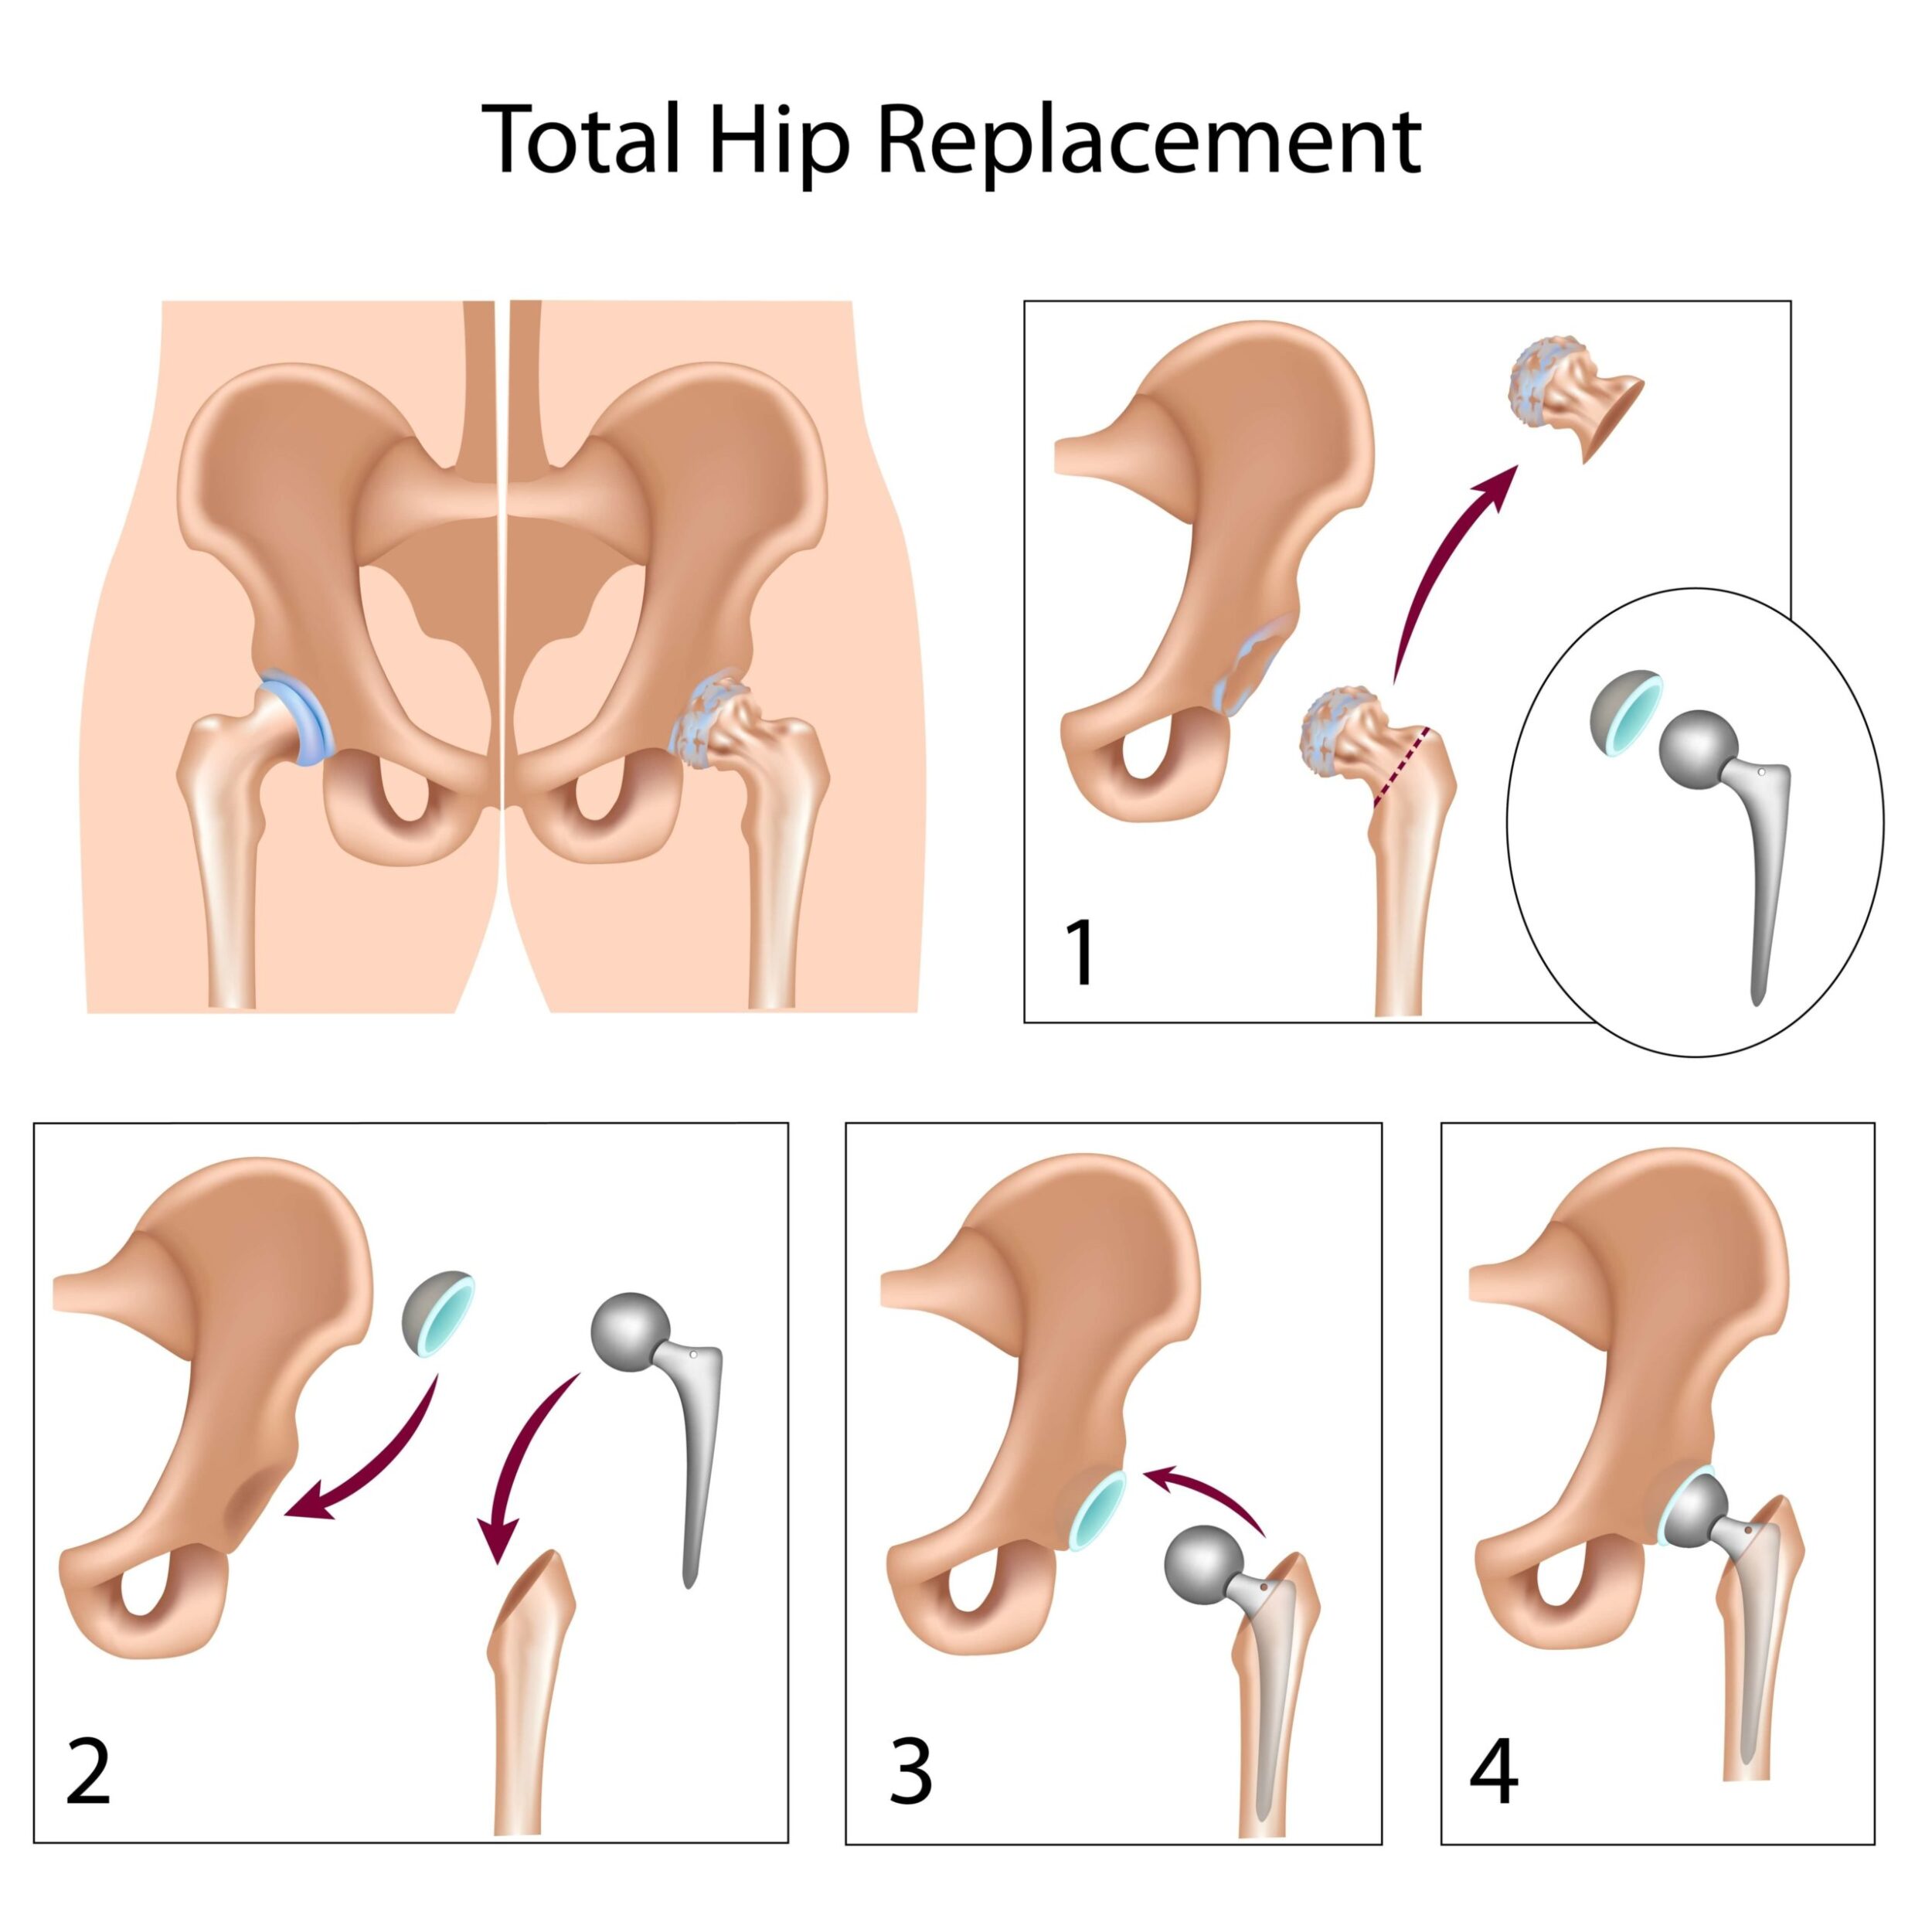 Summit Orthopedics Total Hip Replacement scaled